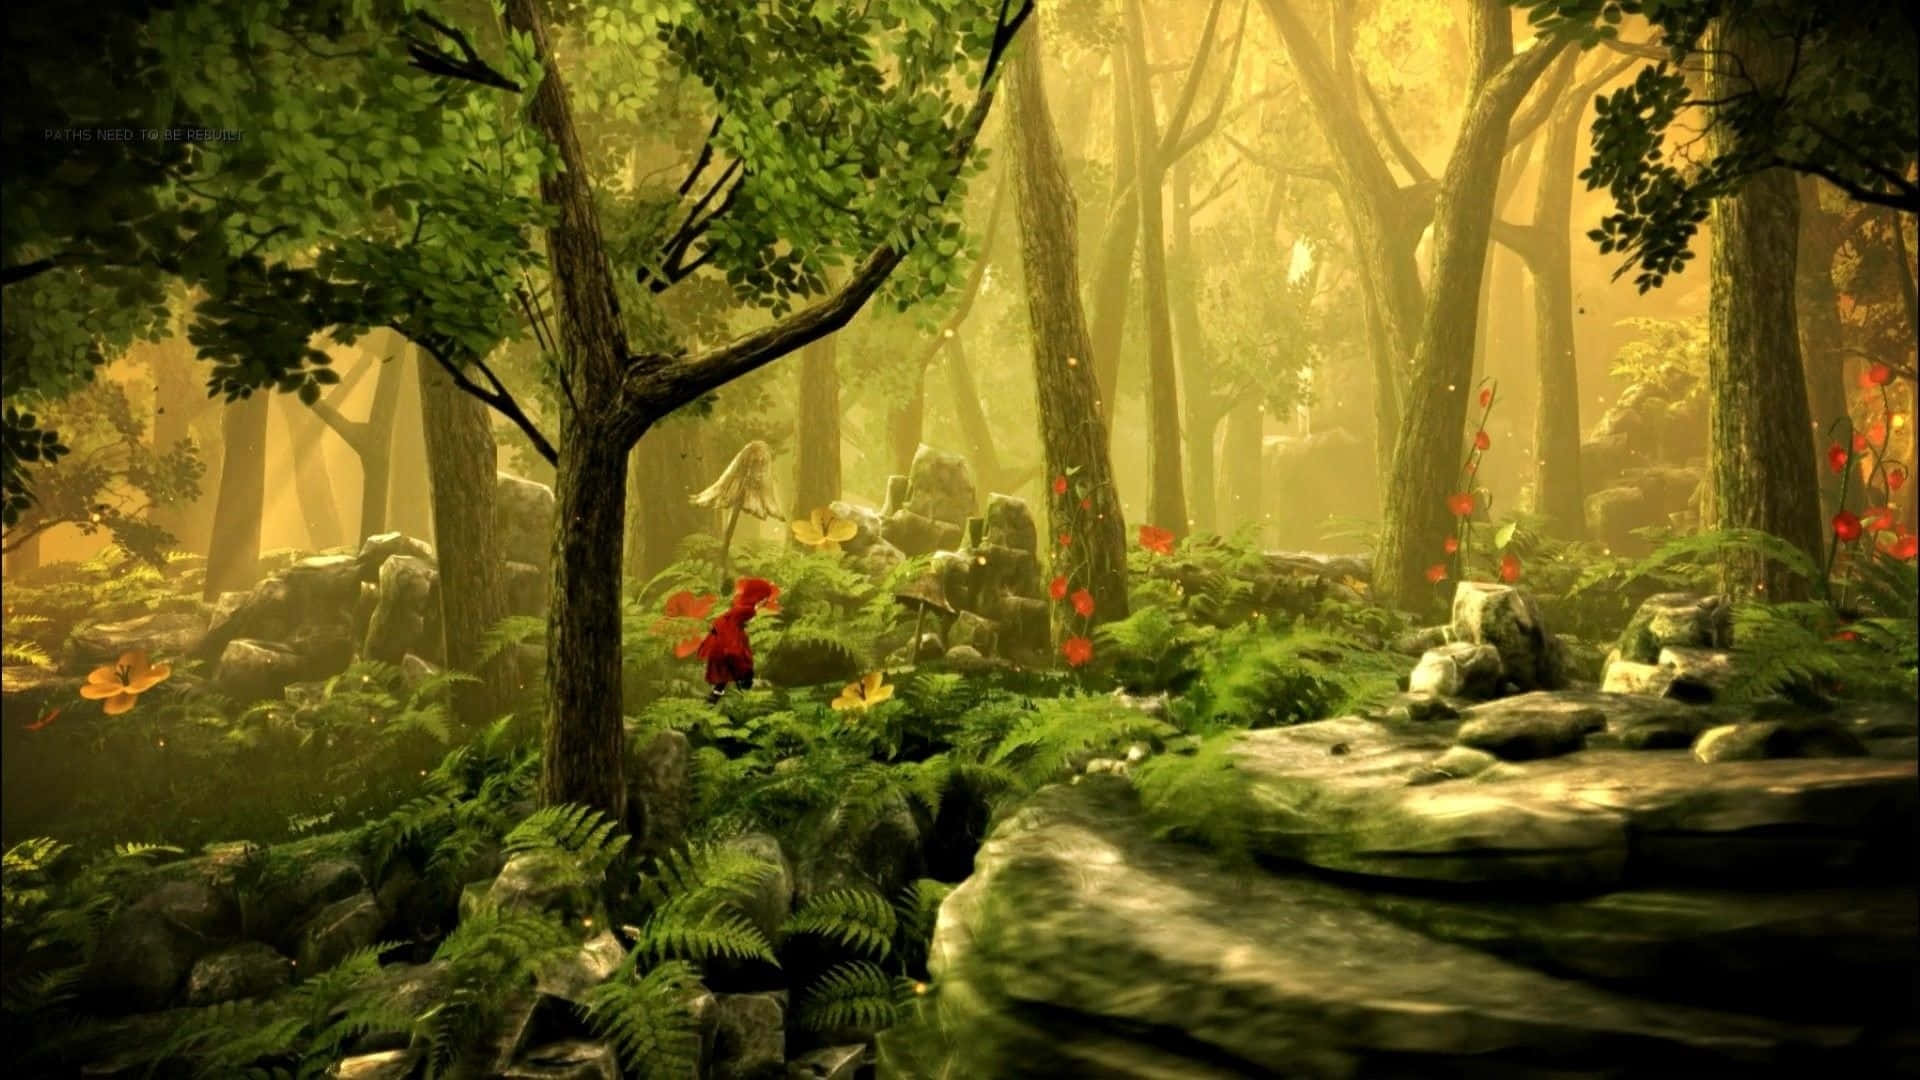 Explore the Magical Fairy Forest Wallpaper